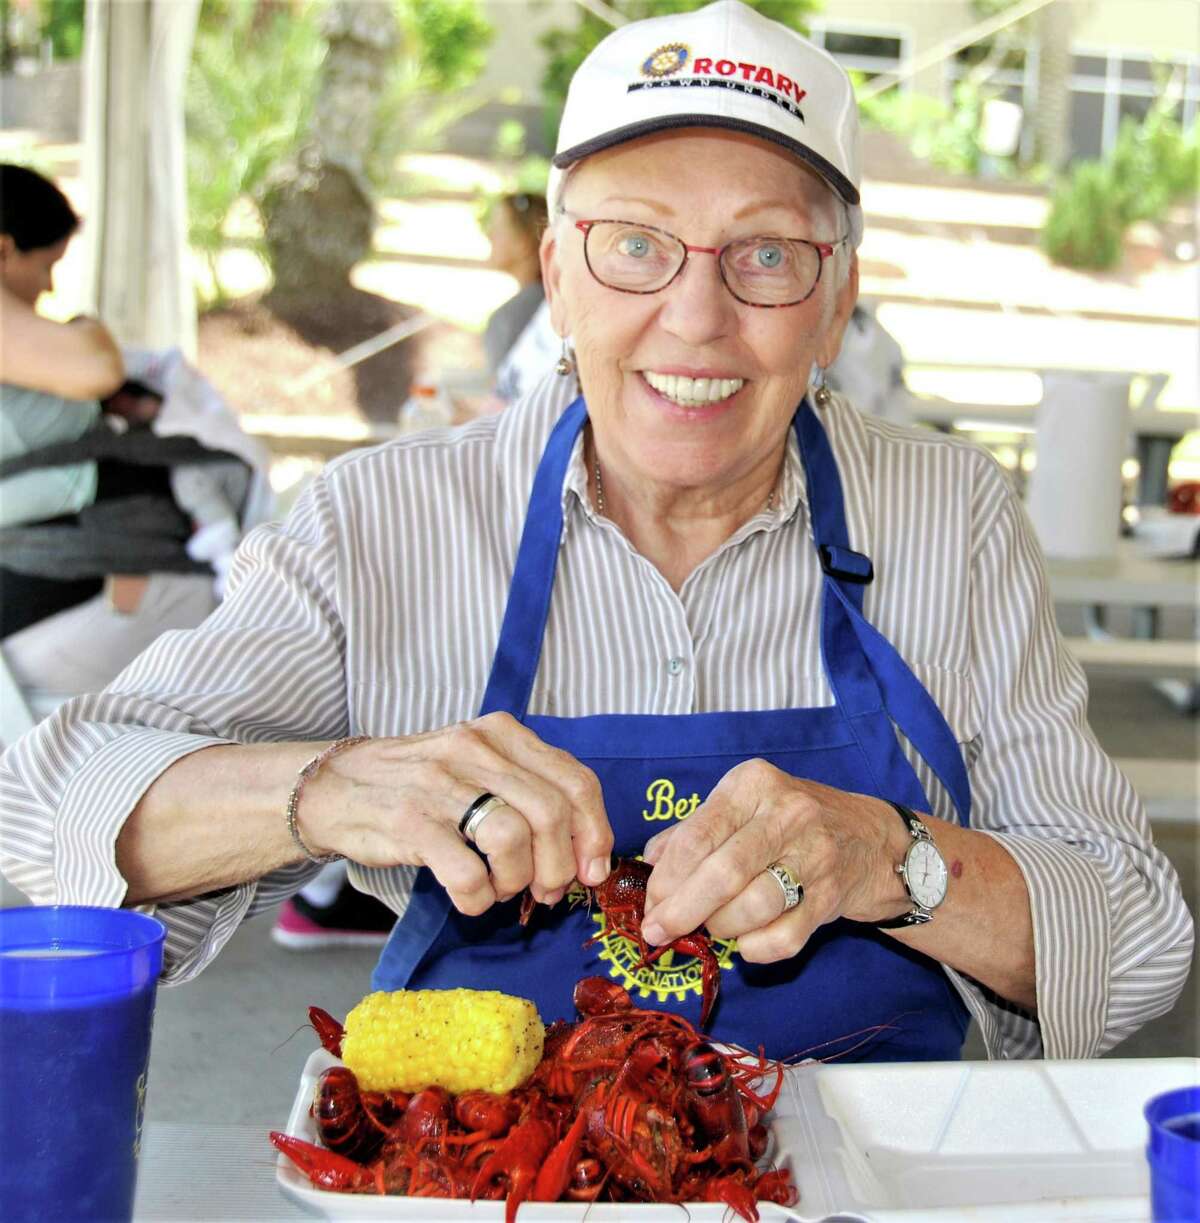 Mudbugs, corn and potatoes highlight the Rotary Club of Galveston’s 10th annual Crawfish Boil May 1 at Moody Gardens. Visit www.galvestonchamber.com or contact Ulli Budelmann, budelmann5910@comcast.net, for details.